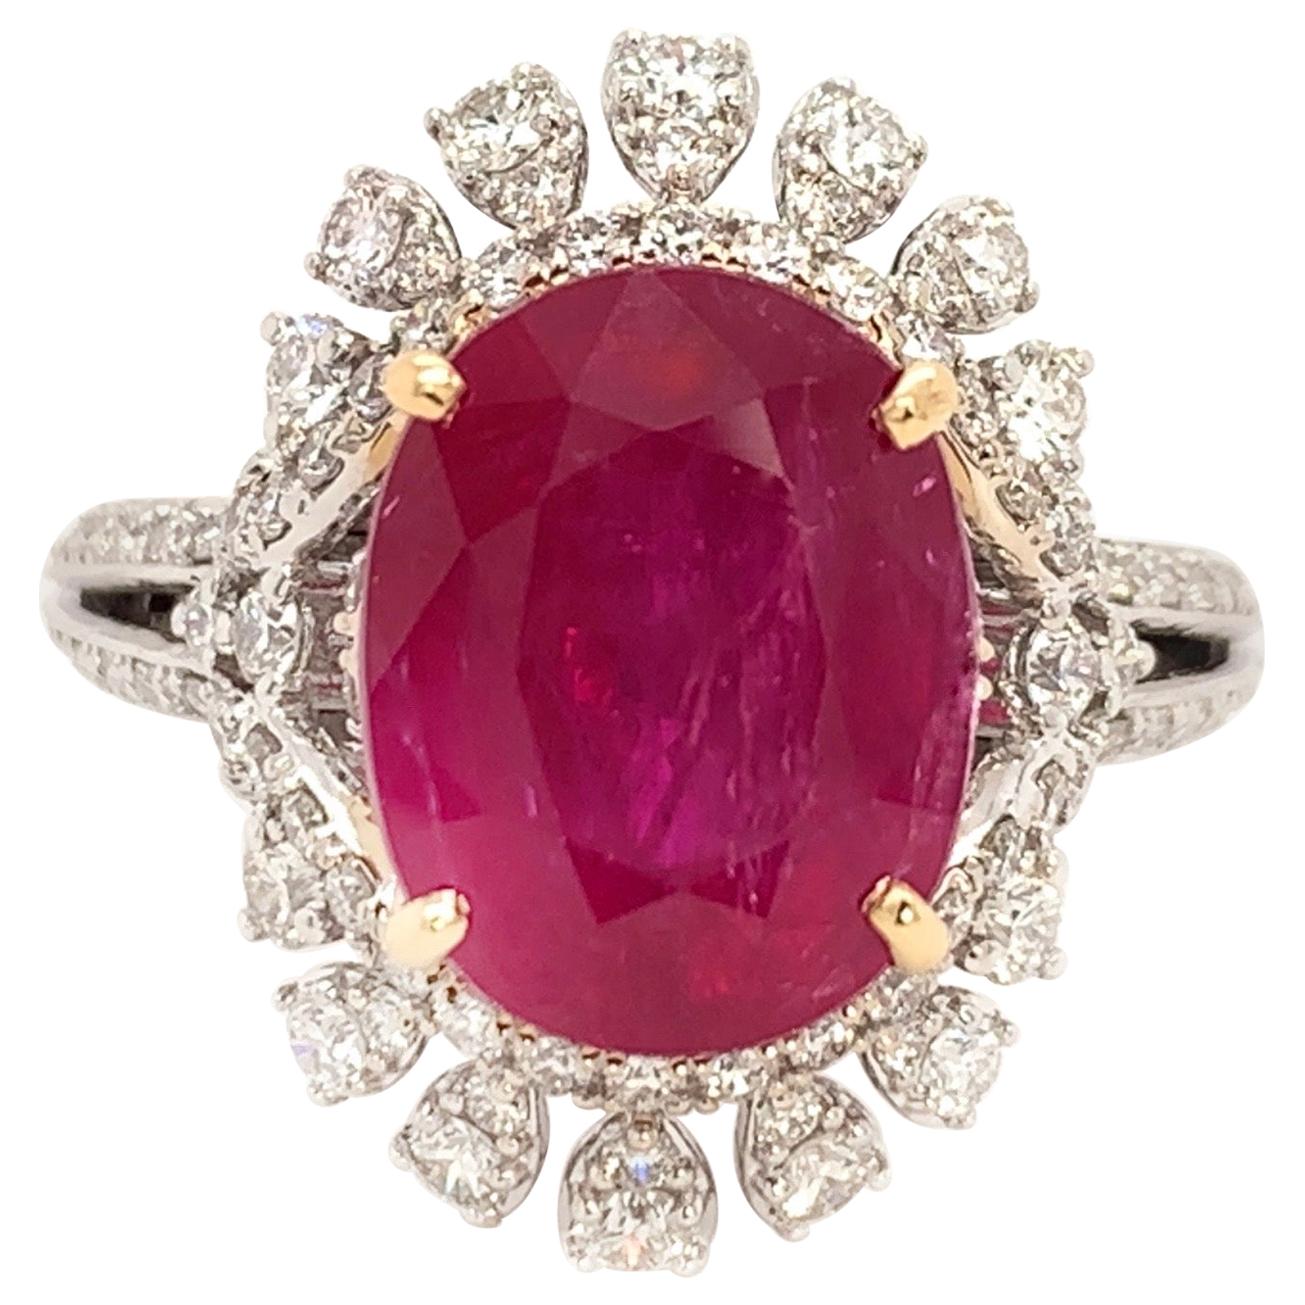 5.83 Carat Mozambique Ruby Cocktail Ring